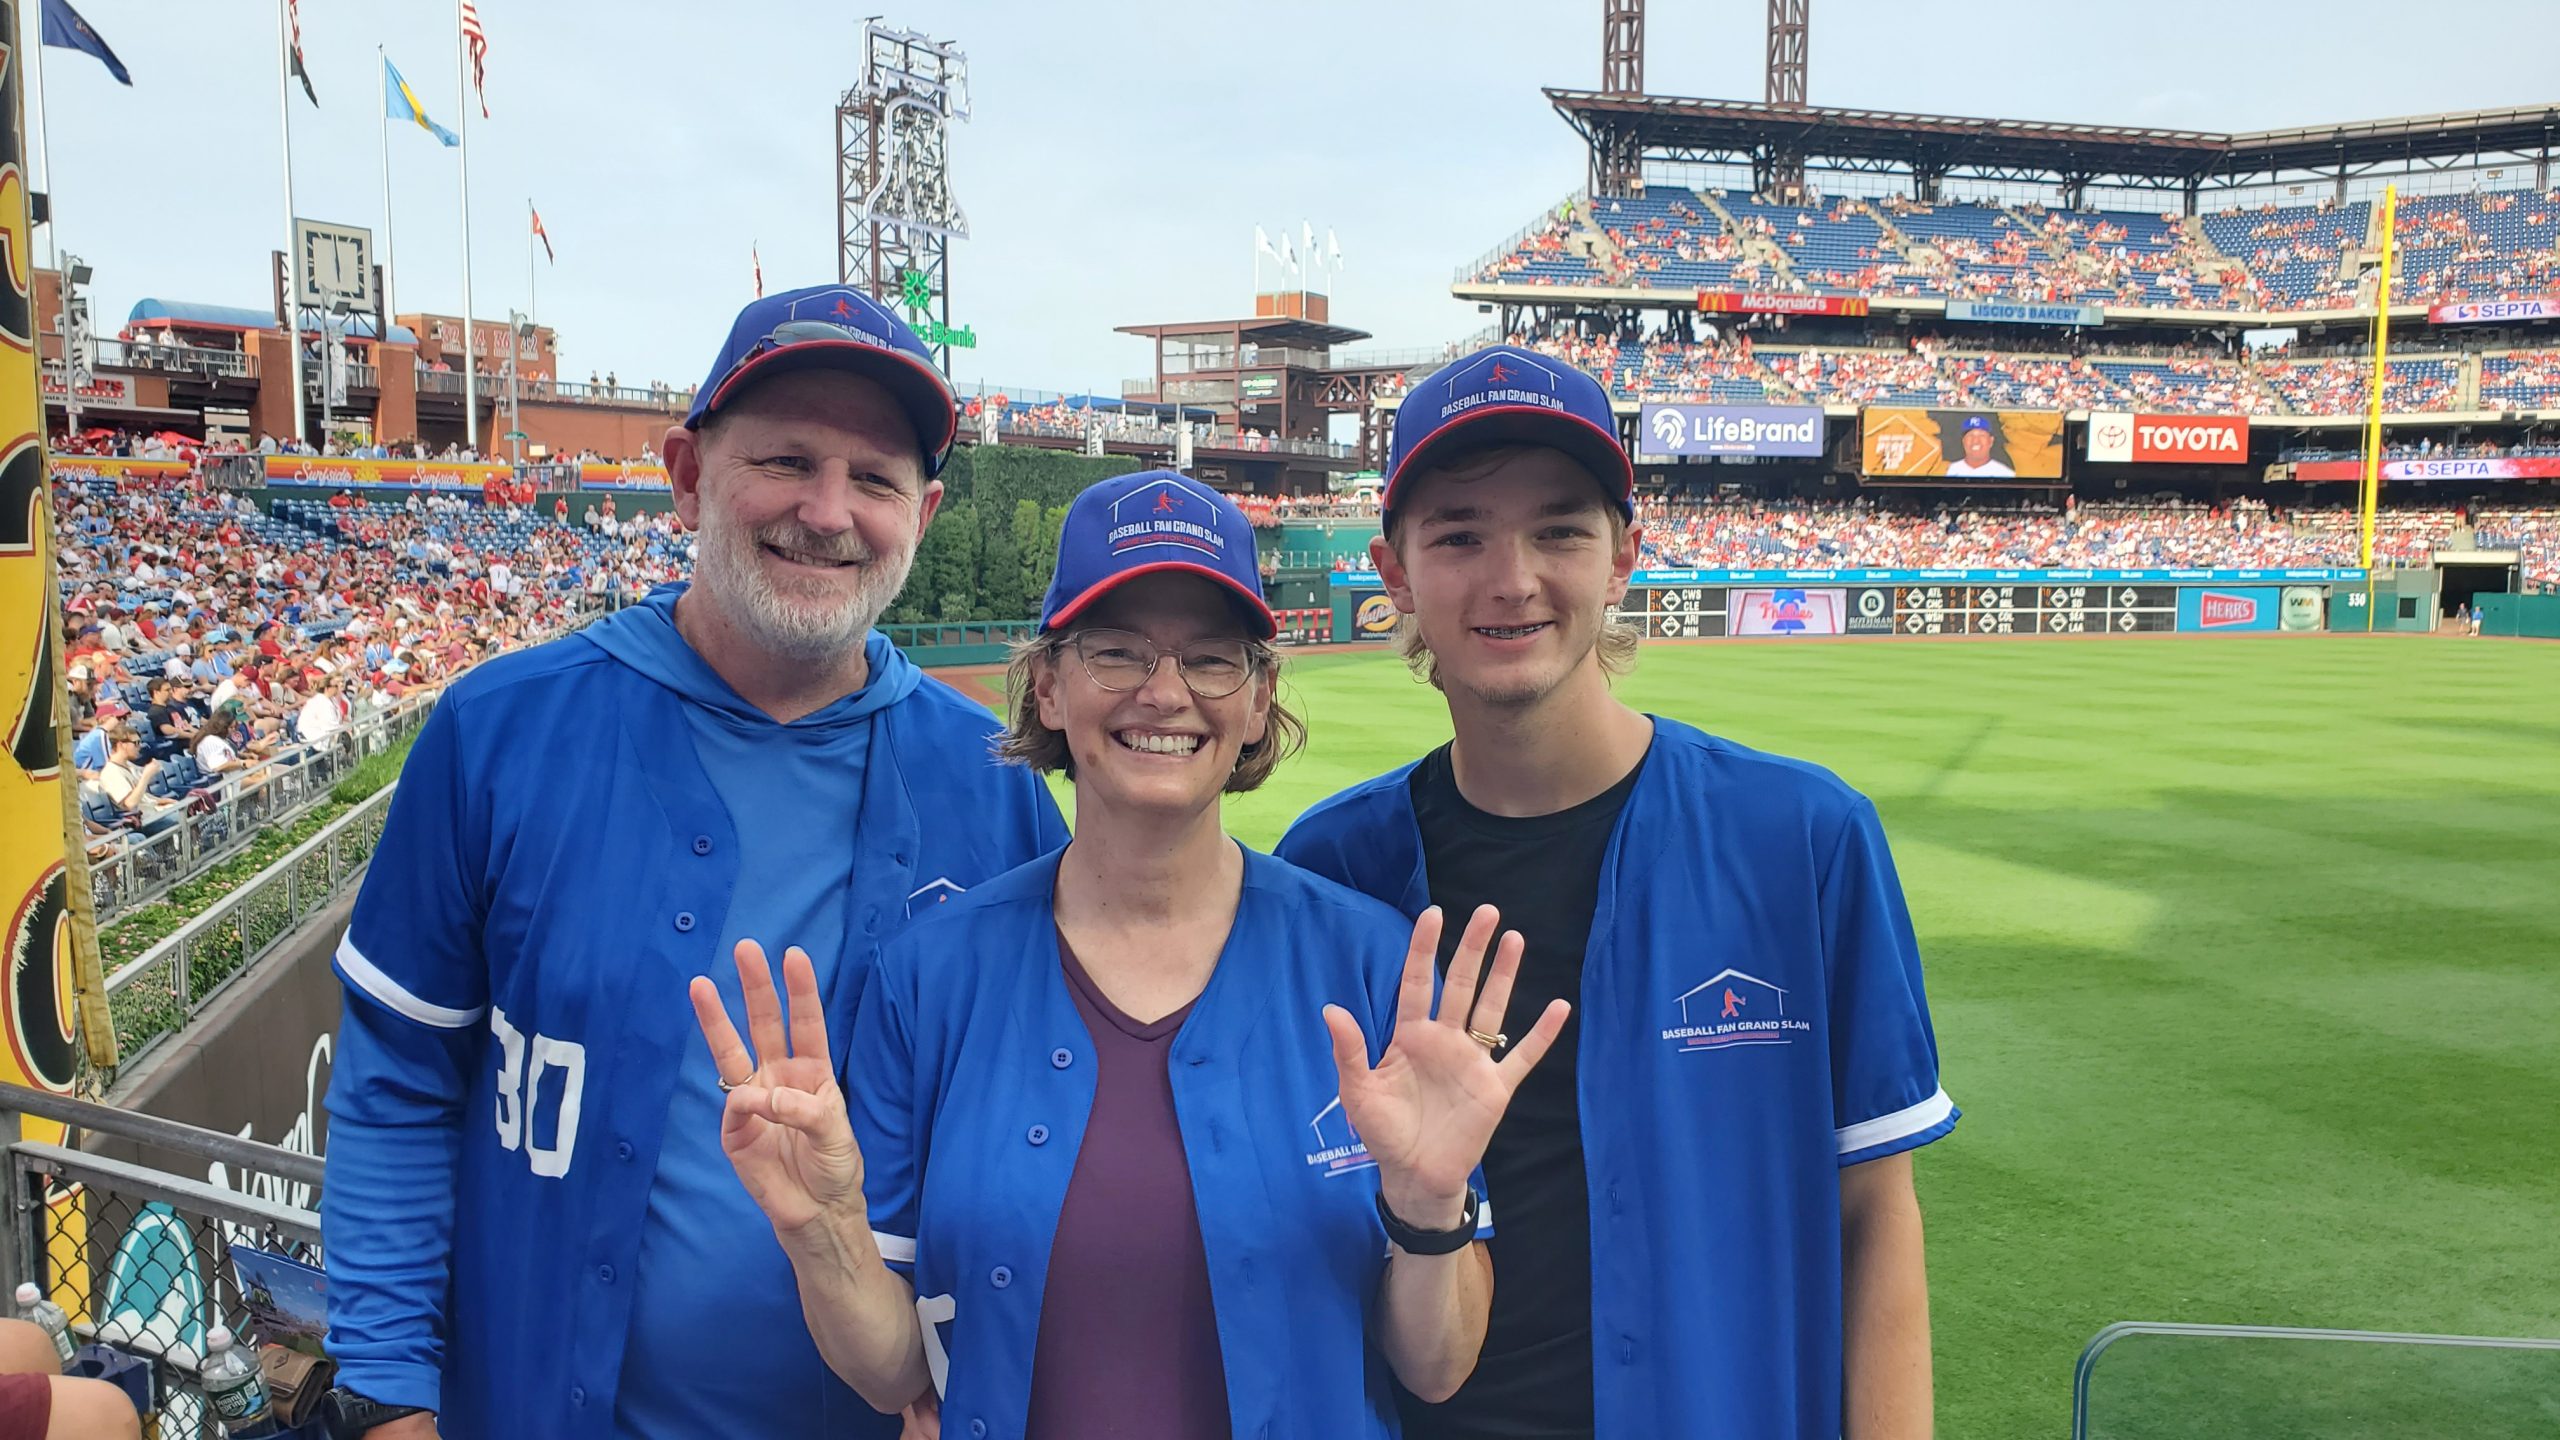 Brad, Heather and Ryan in Citizens Bank Park, with the baseball diamond behind them, holding up 8 fingers.